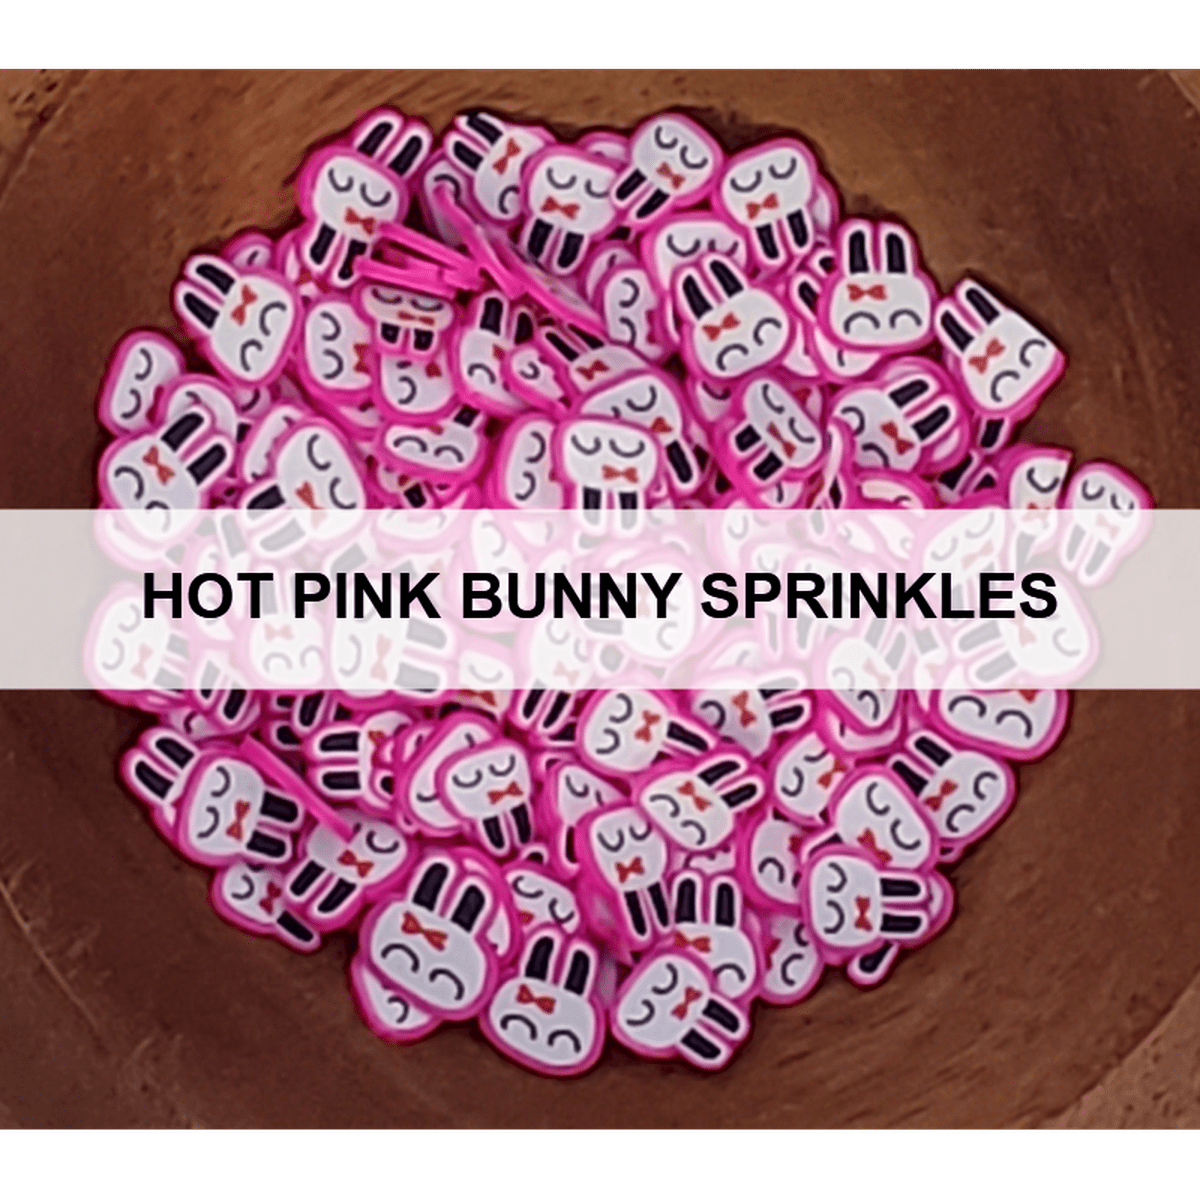 Hot Pink Bunny Sprinkles by Kat Scrappiness - Kat Scrappiness